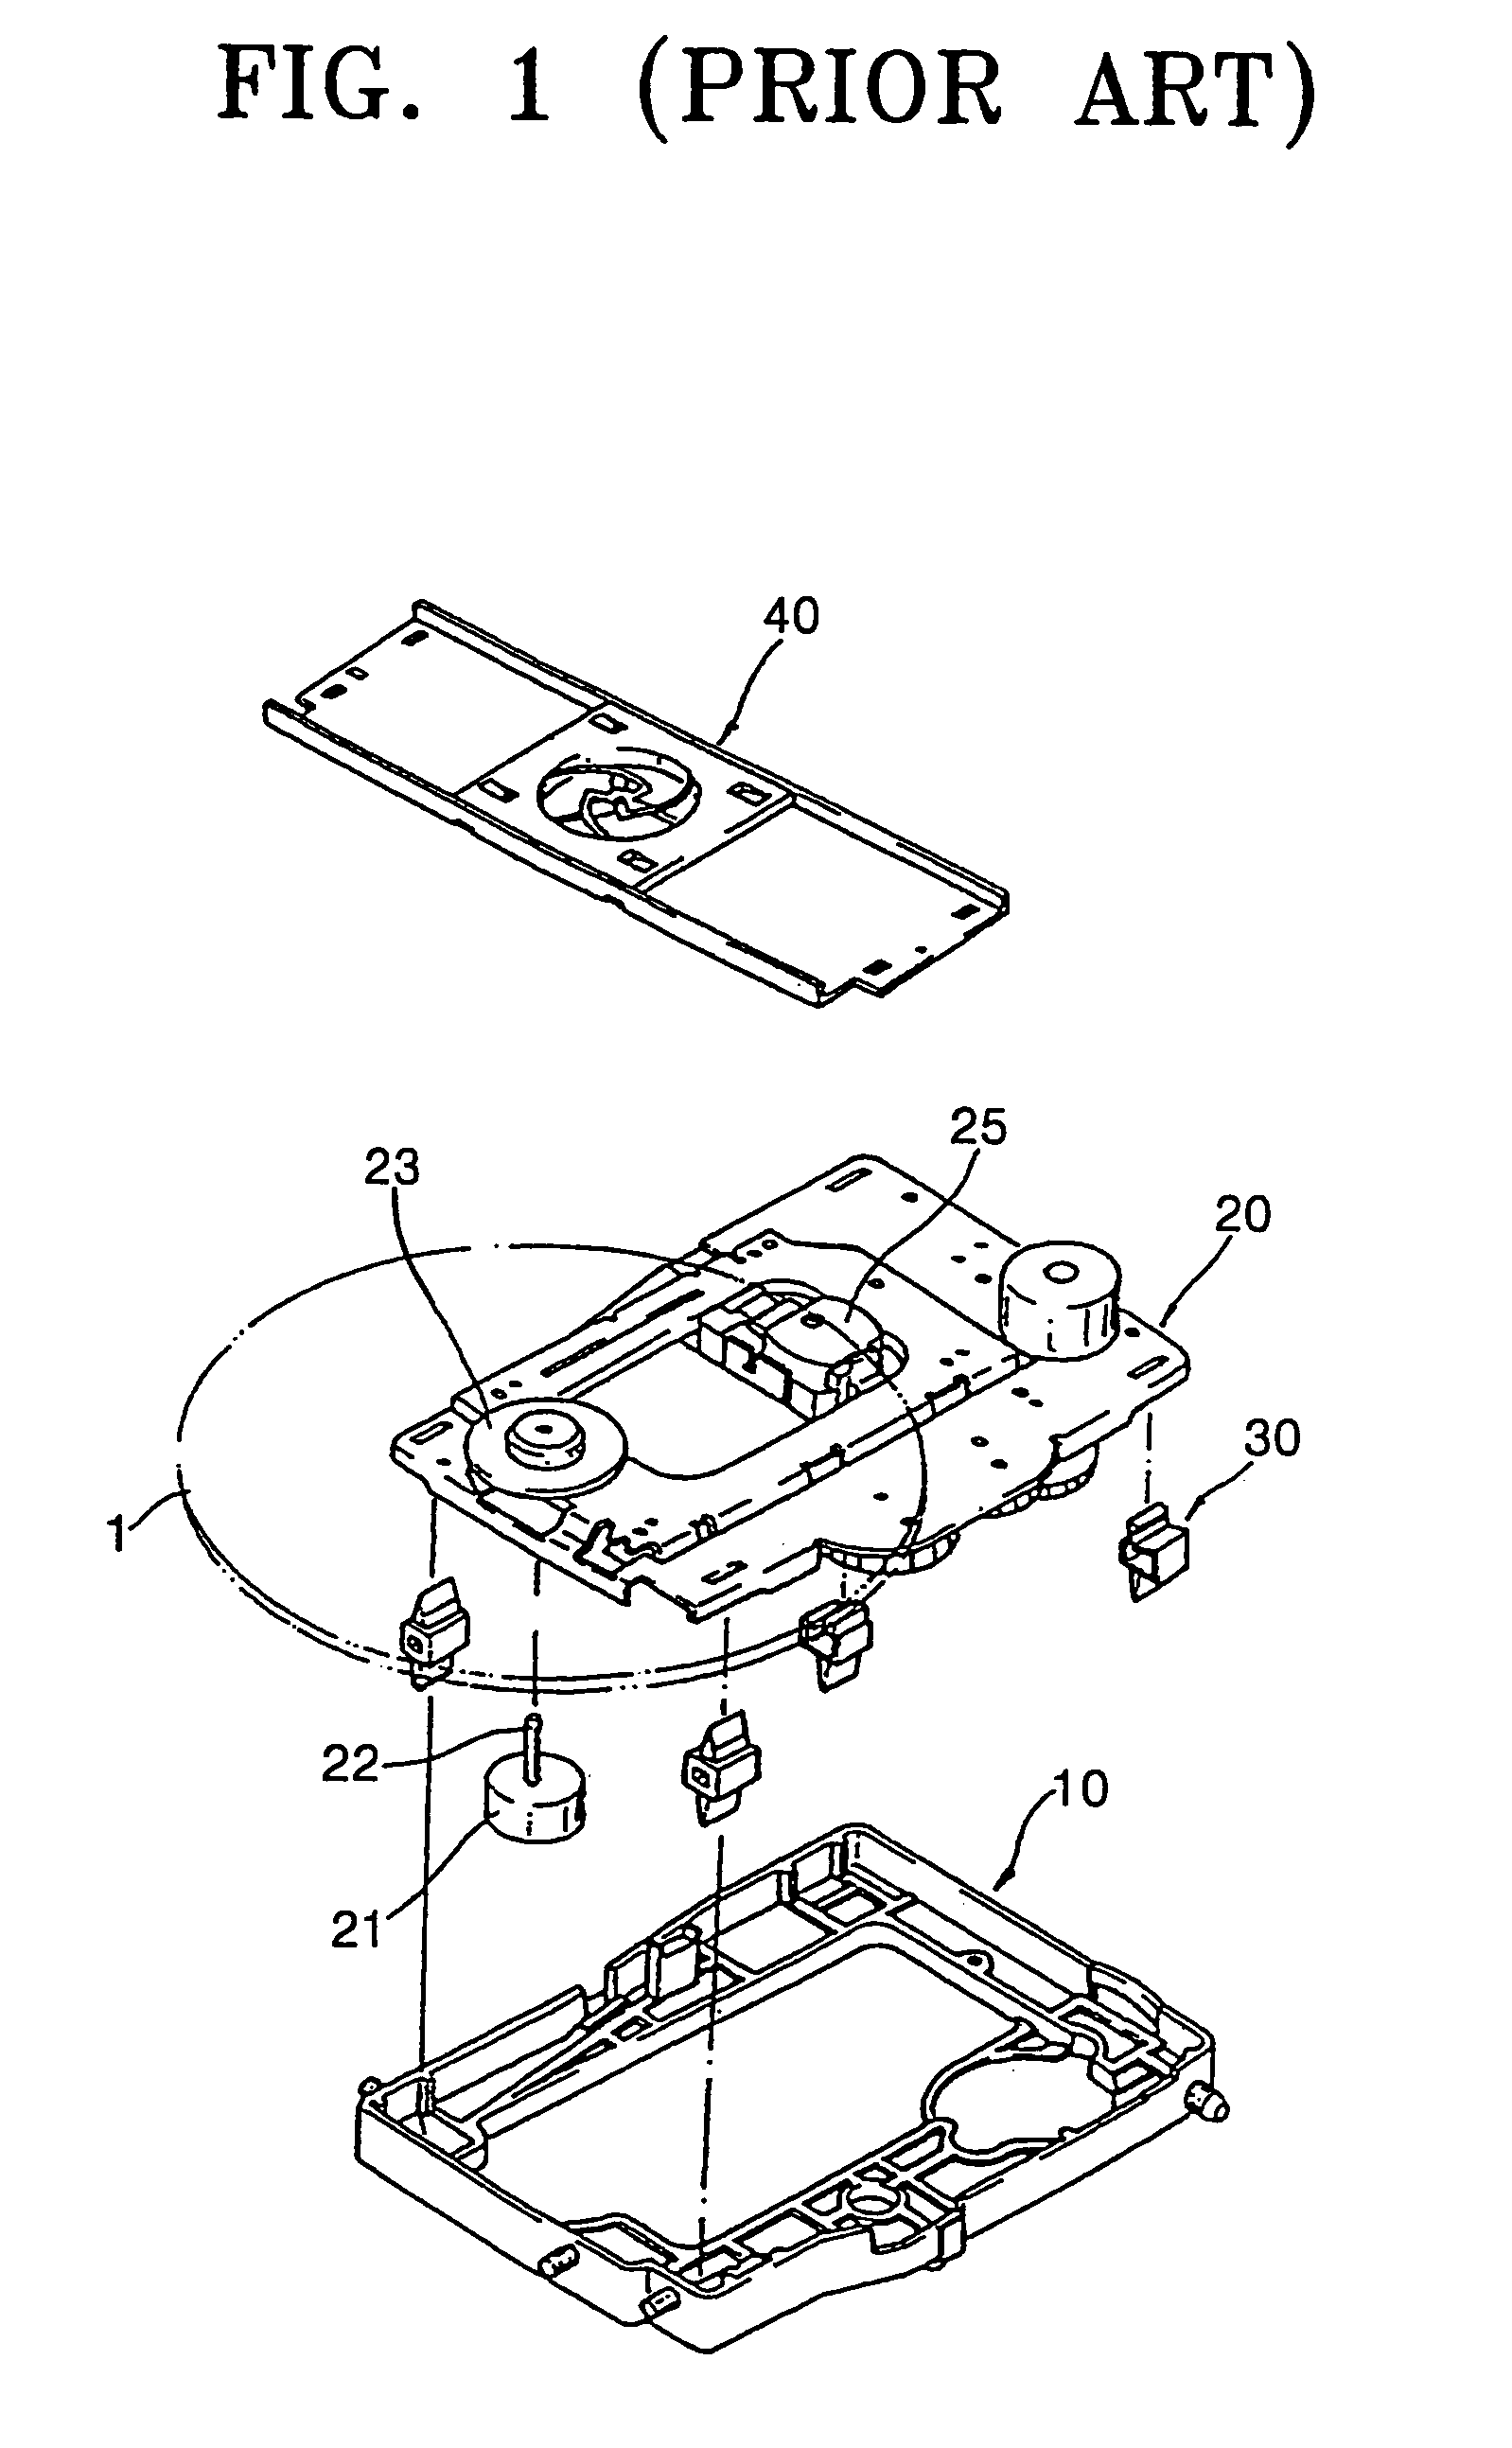 Disk player, and self-compensating-dynamic-balancer (SCDB) integrated turntable, SCDB integrated clamper and SCDB integrated spindle motor employed in the same